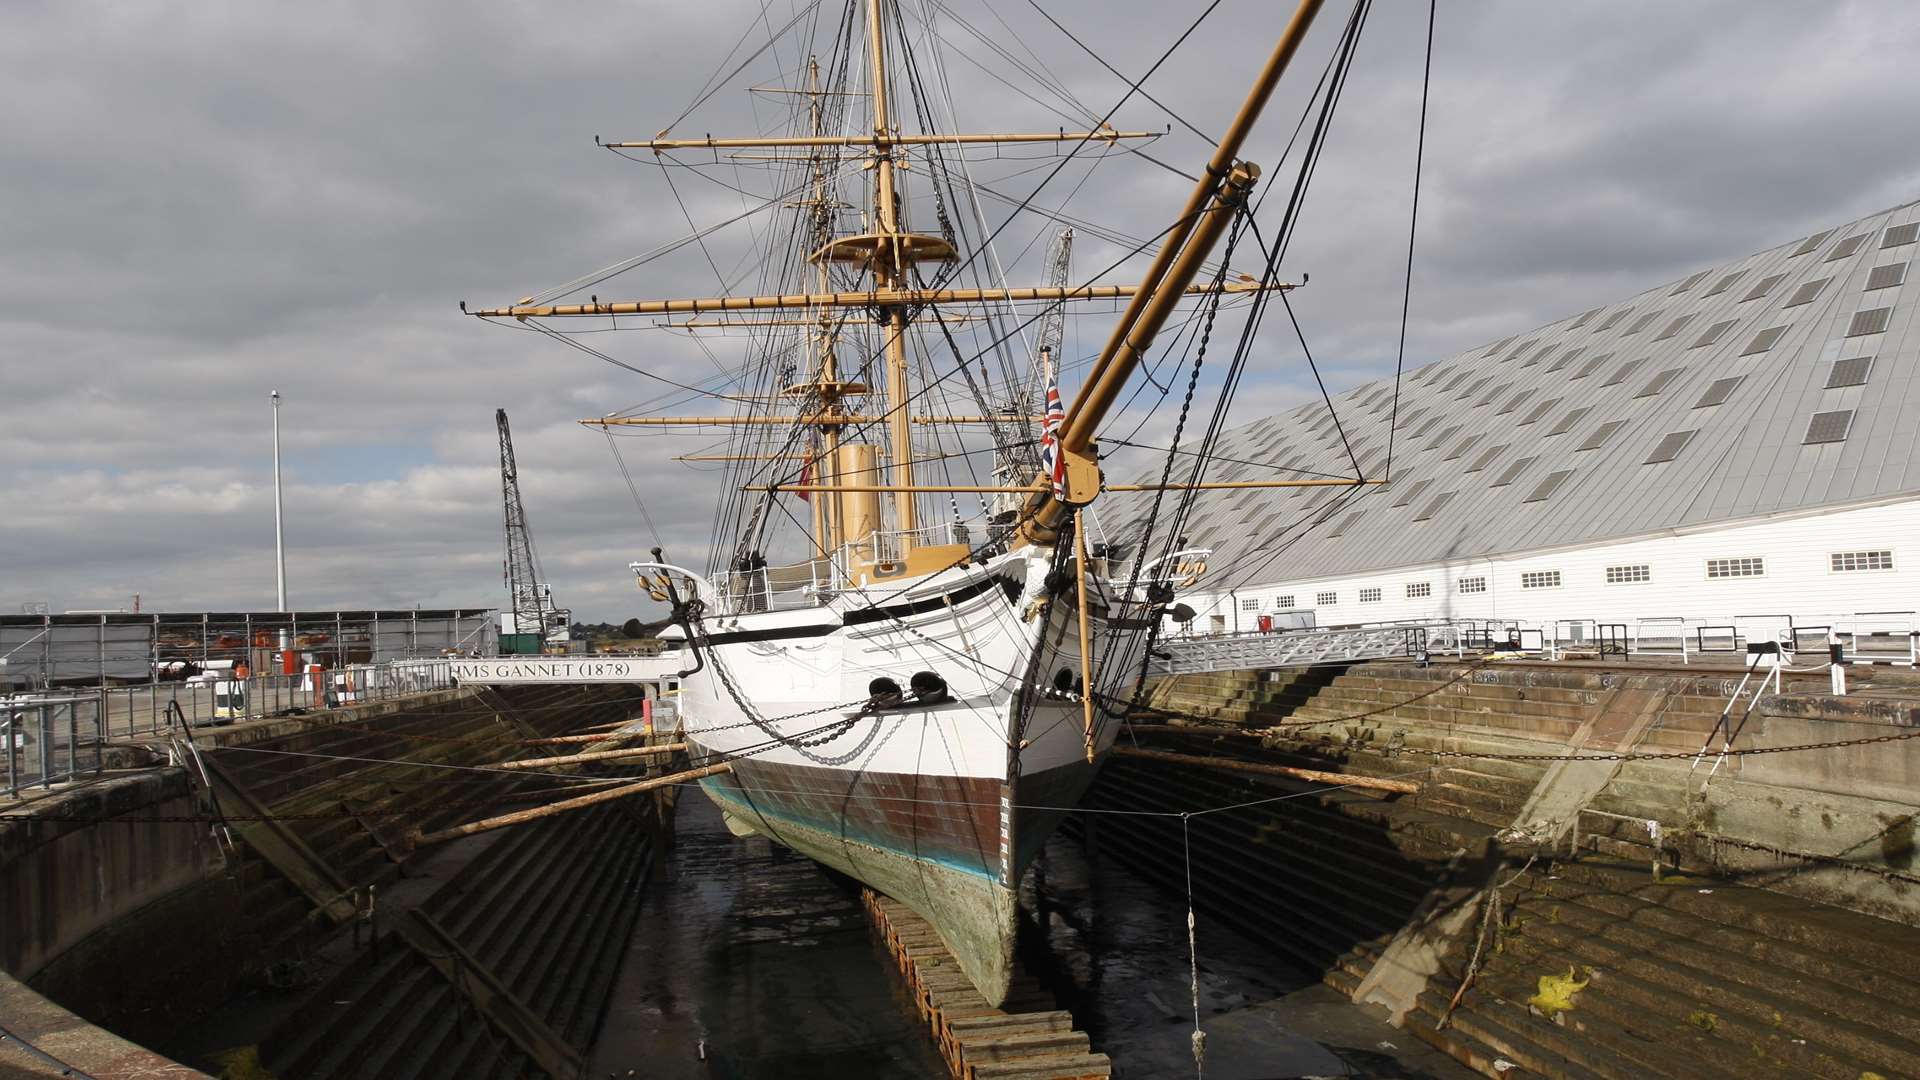 Historic Dockyard, Chatham. The water has been drained from the basin where HMS Gannet is tied up. Picture: Peter Still